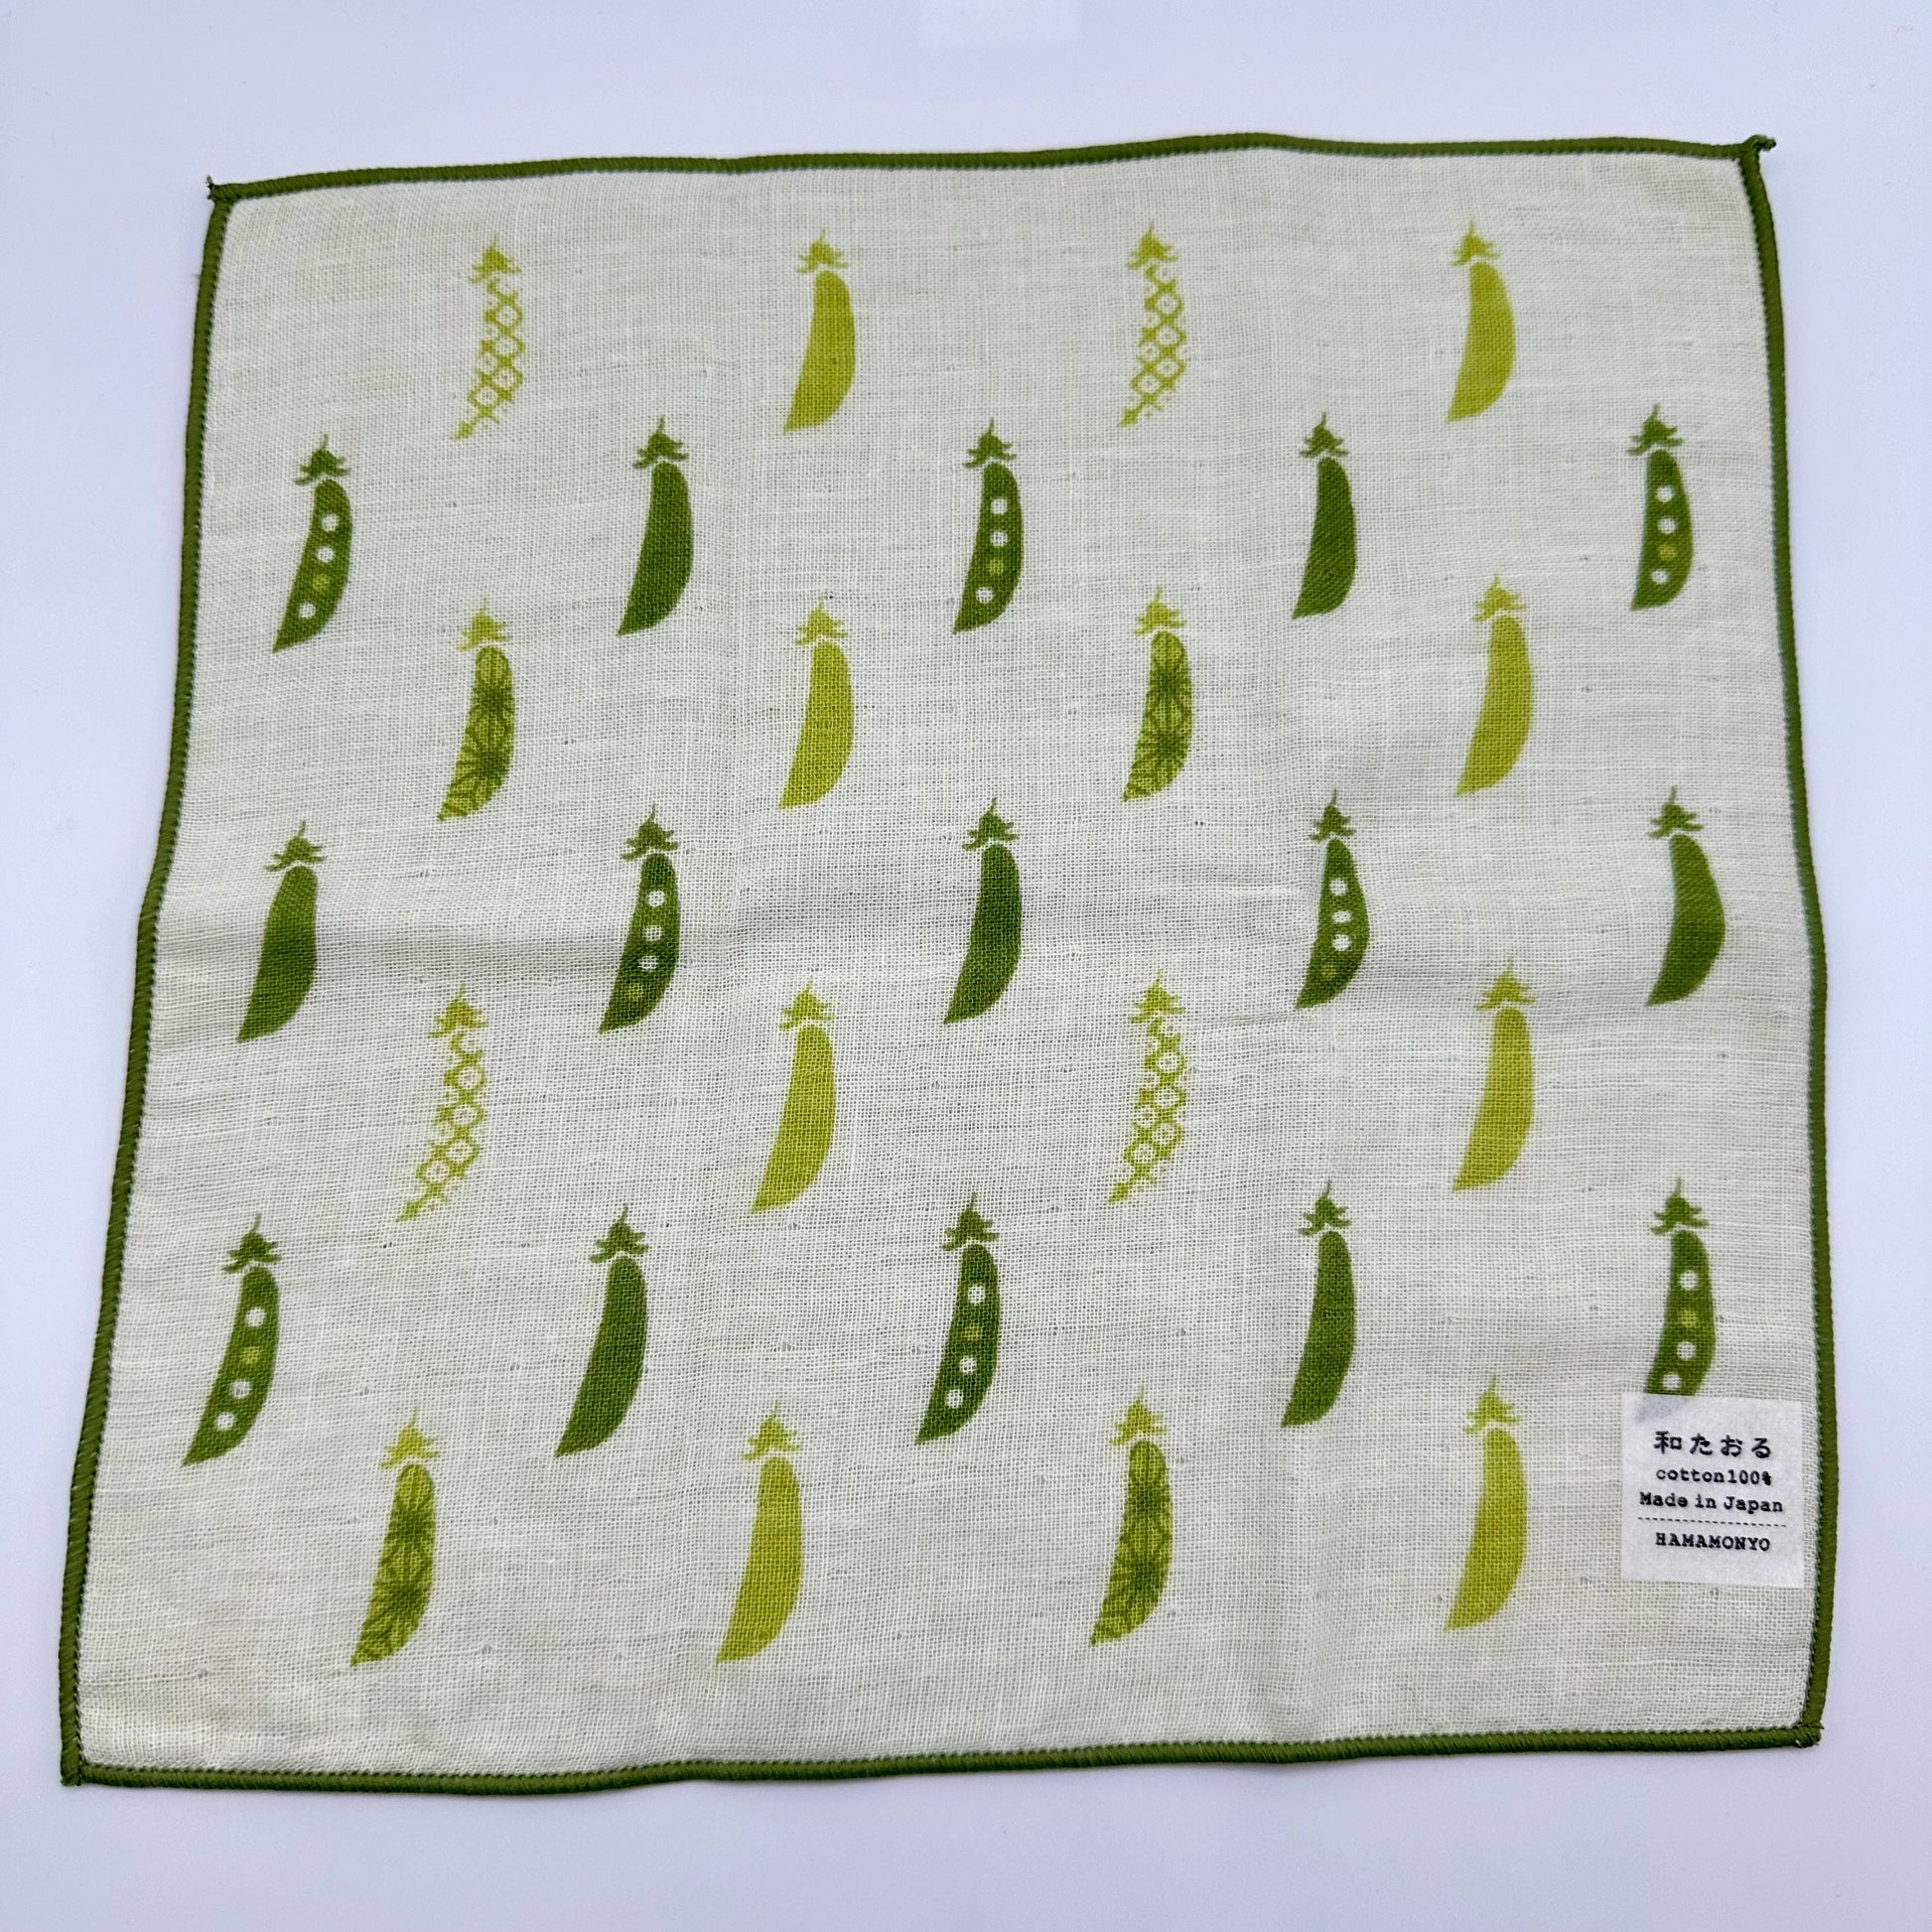 Hand towel with assorted peas in a pod.